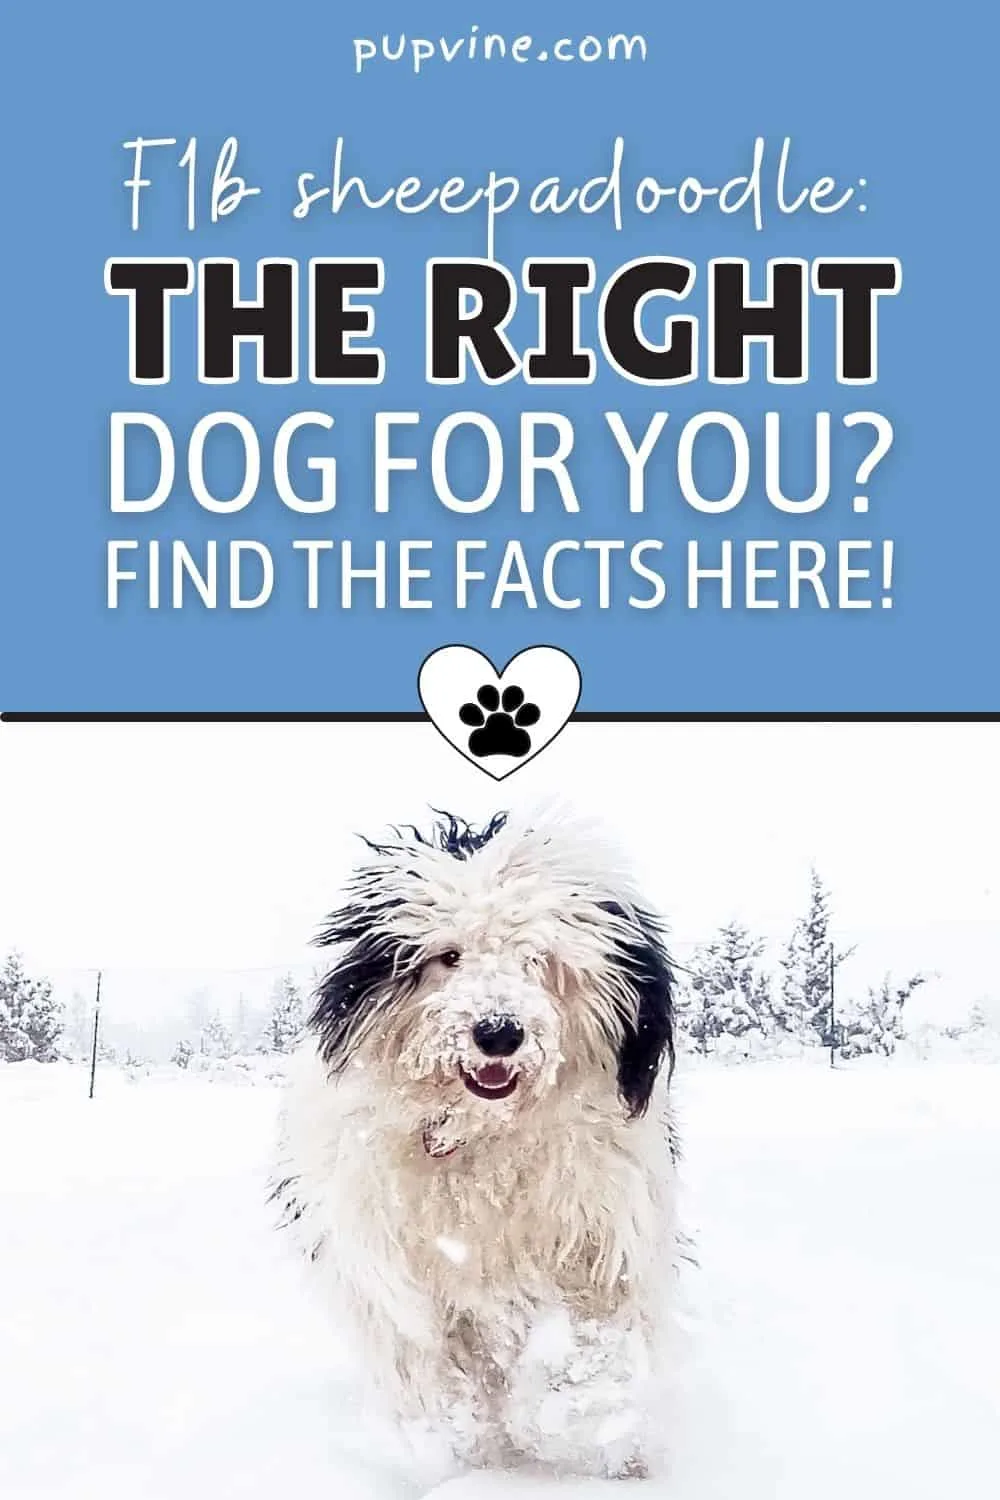 F1b Sheepadoodle: The Right Dog For You? Find The Facts Here!